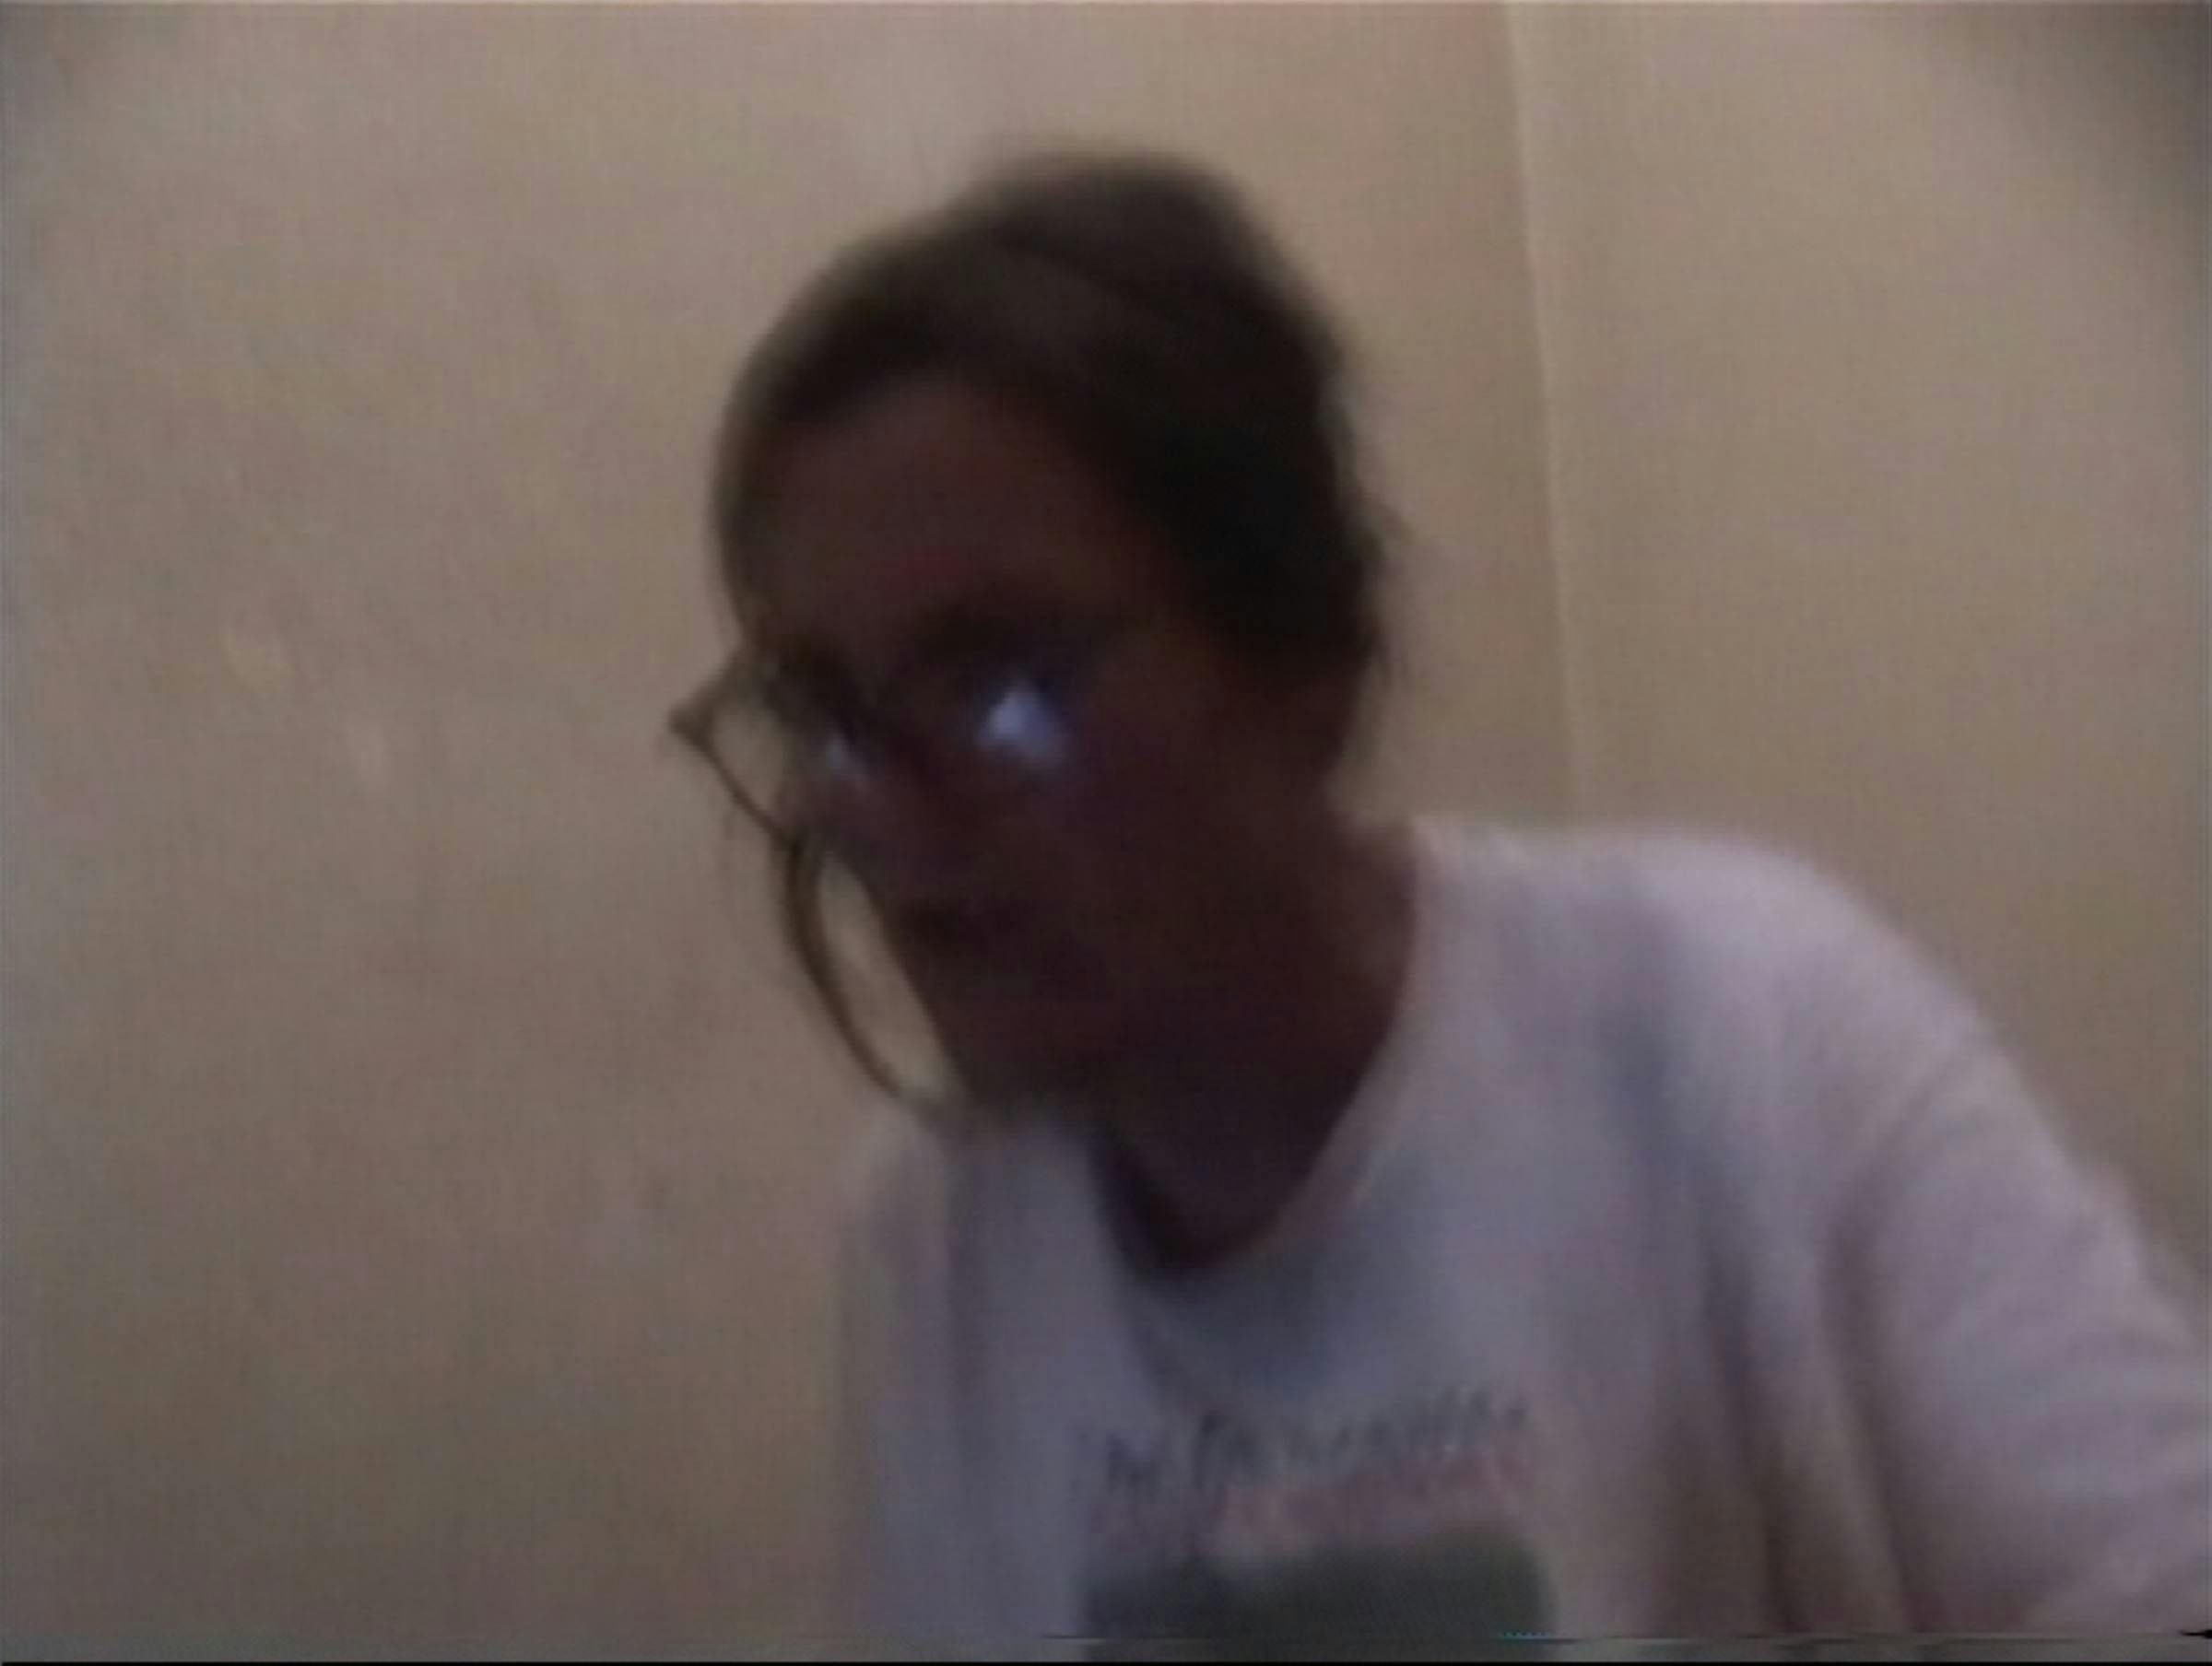 Image of someone wearing glasses and wearing a white t-shirt in a room with cream walls